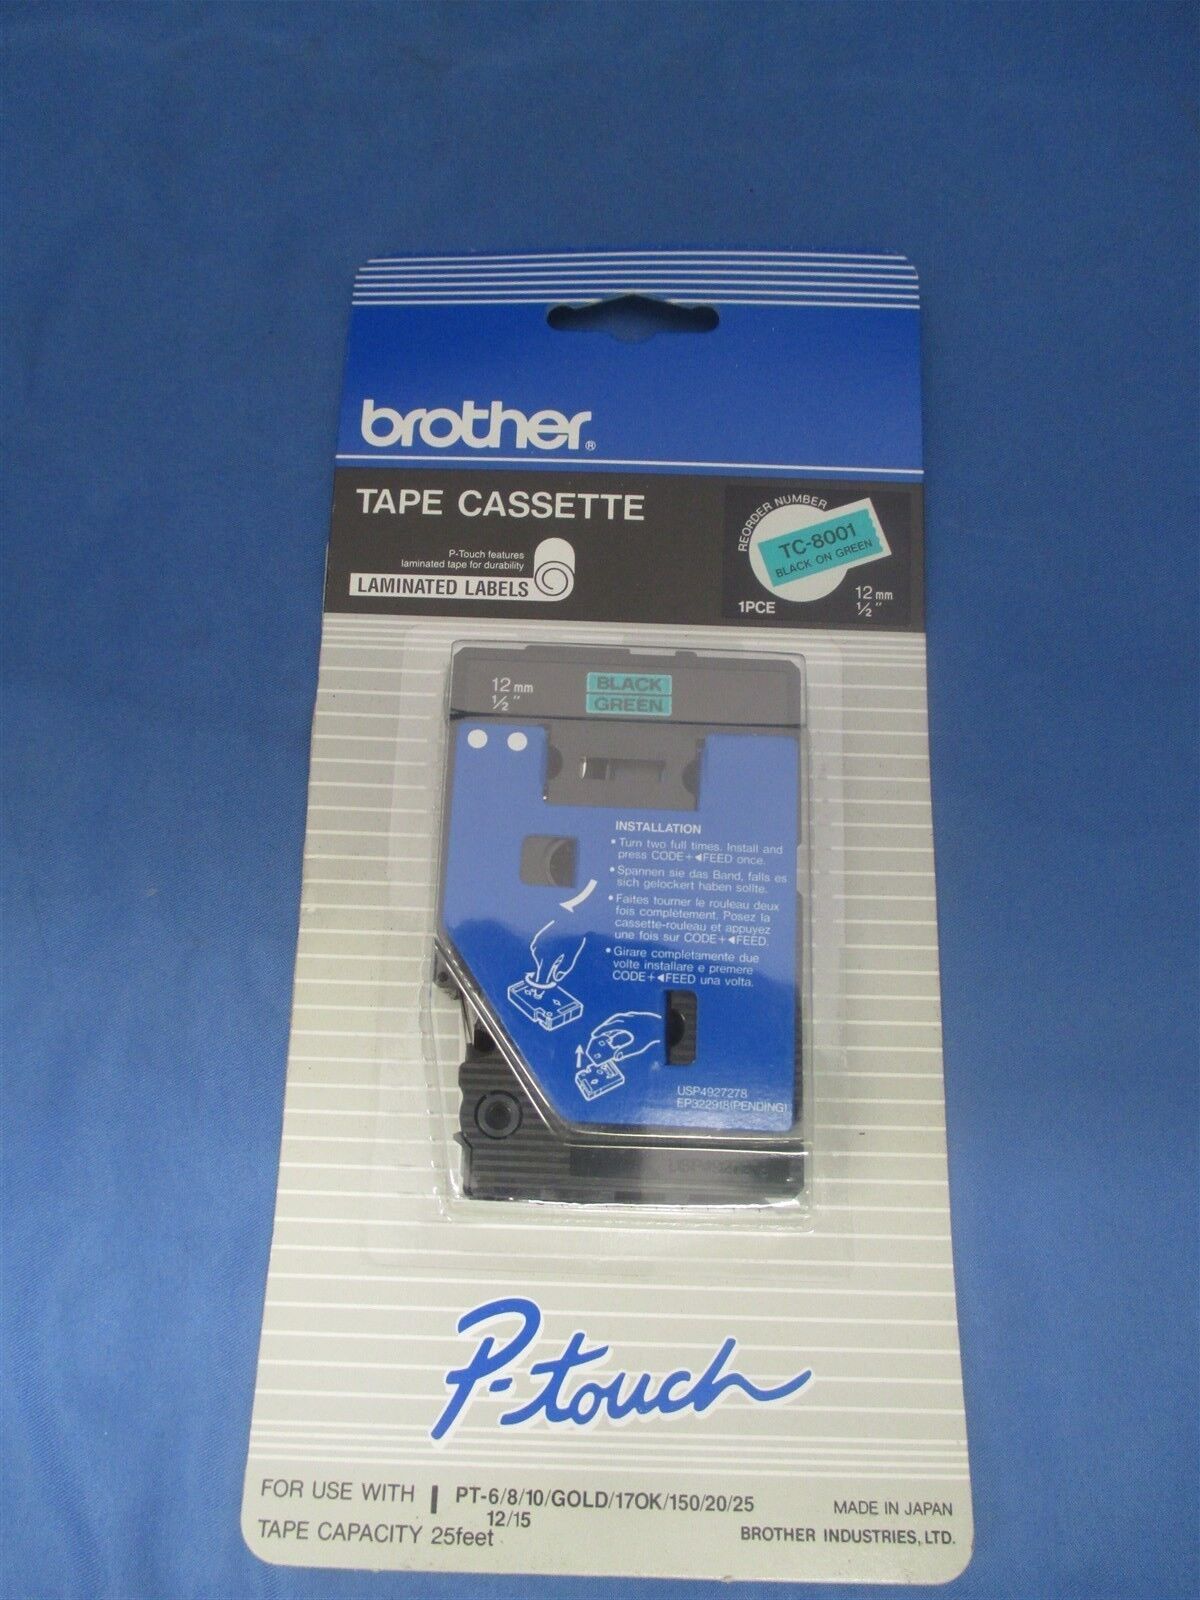 Brother P-touch Tape Cassette TC-8001